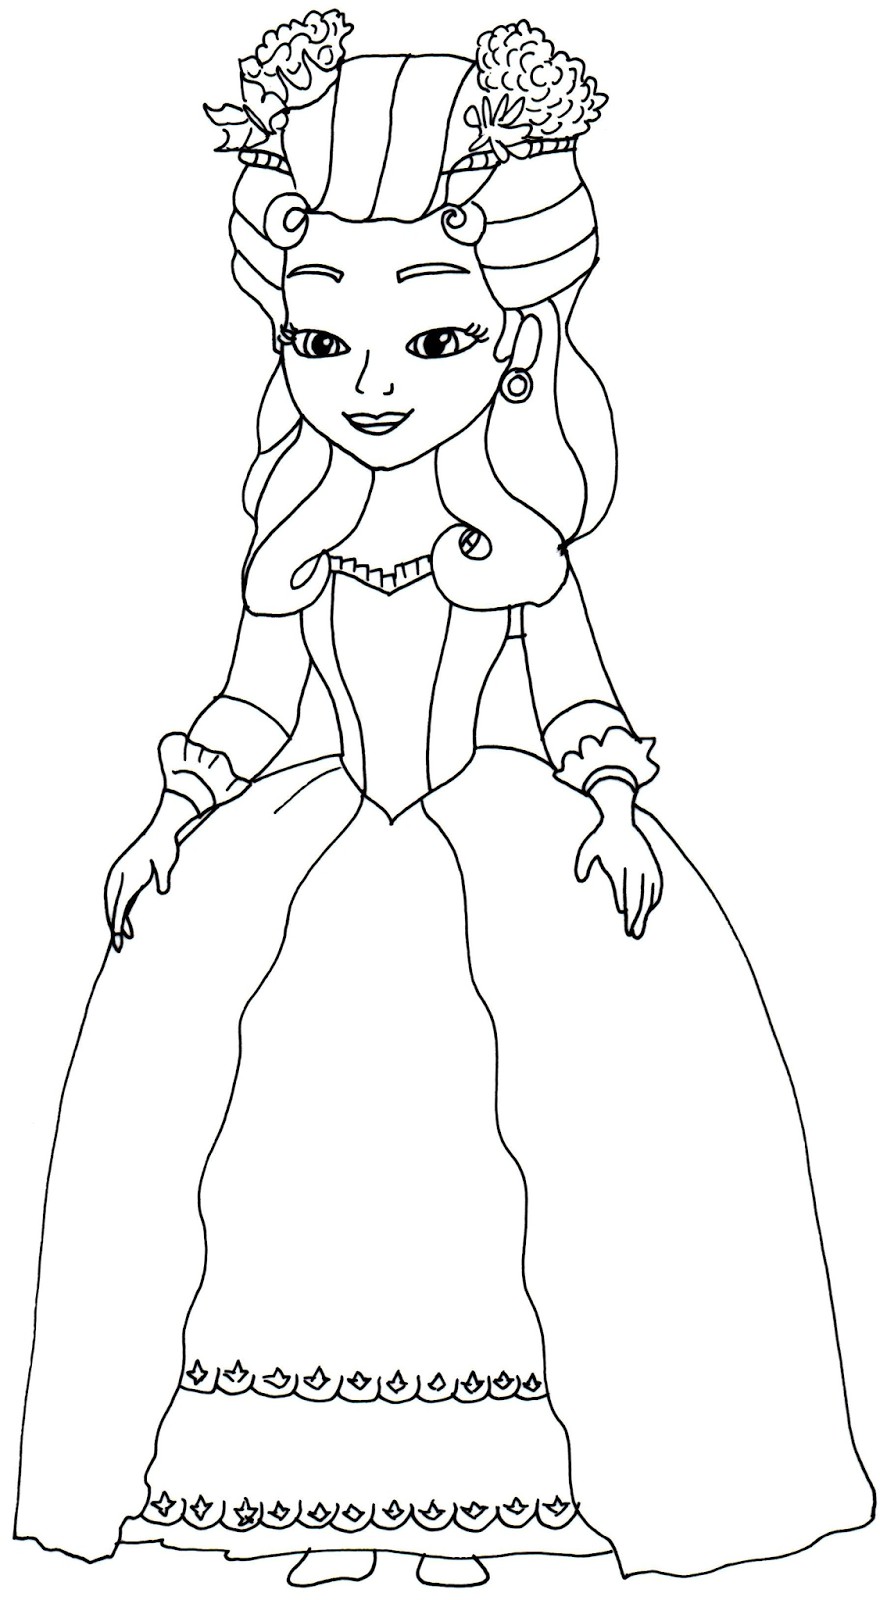 Princess Hildegard Sofia the First coloring page in her basic outfit